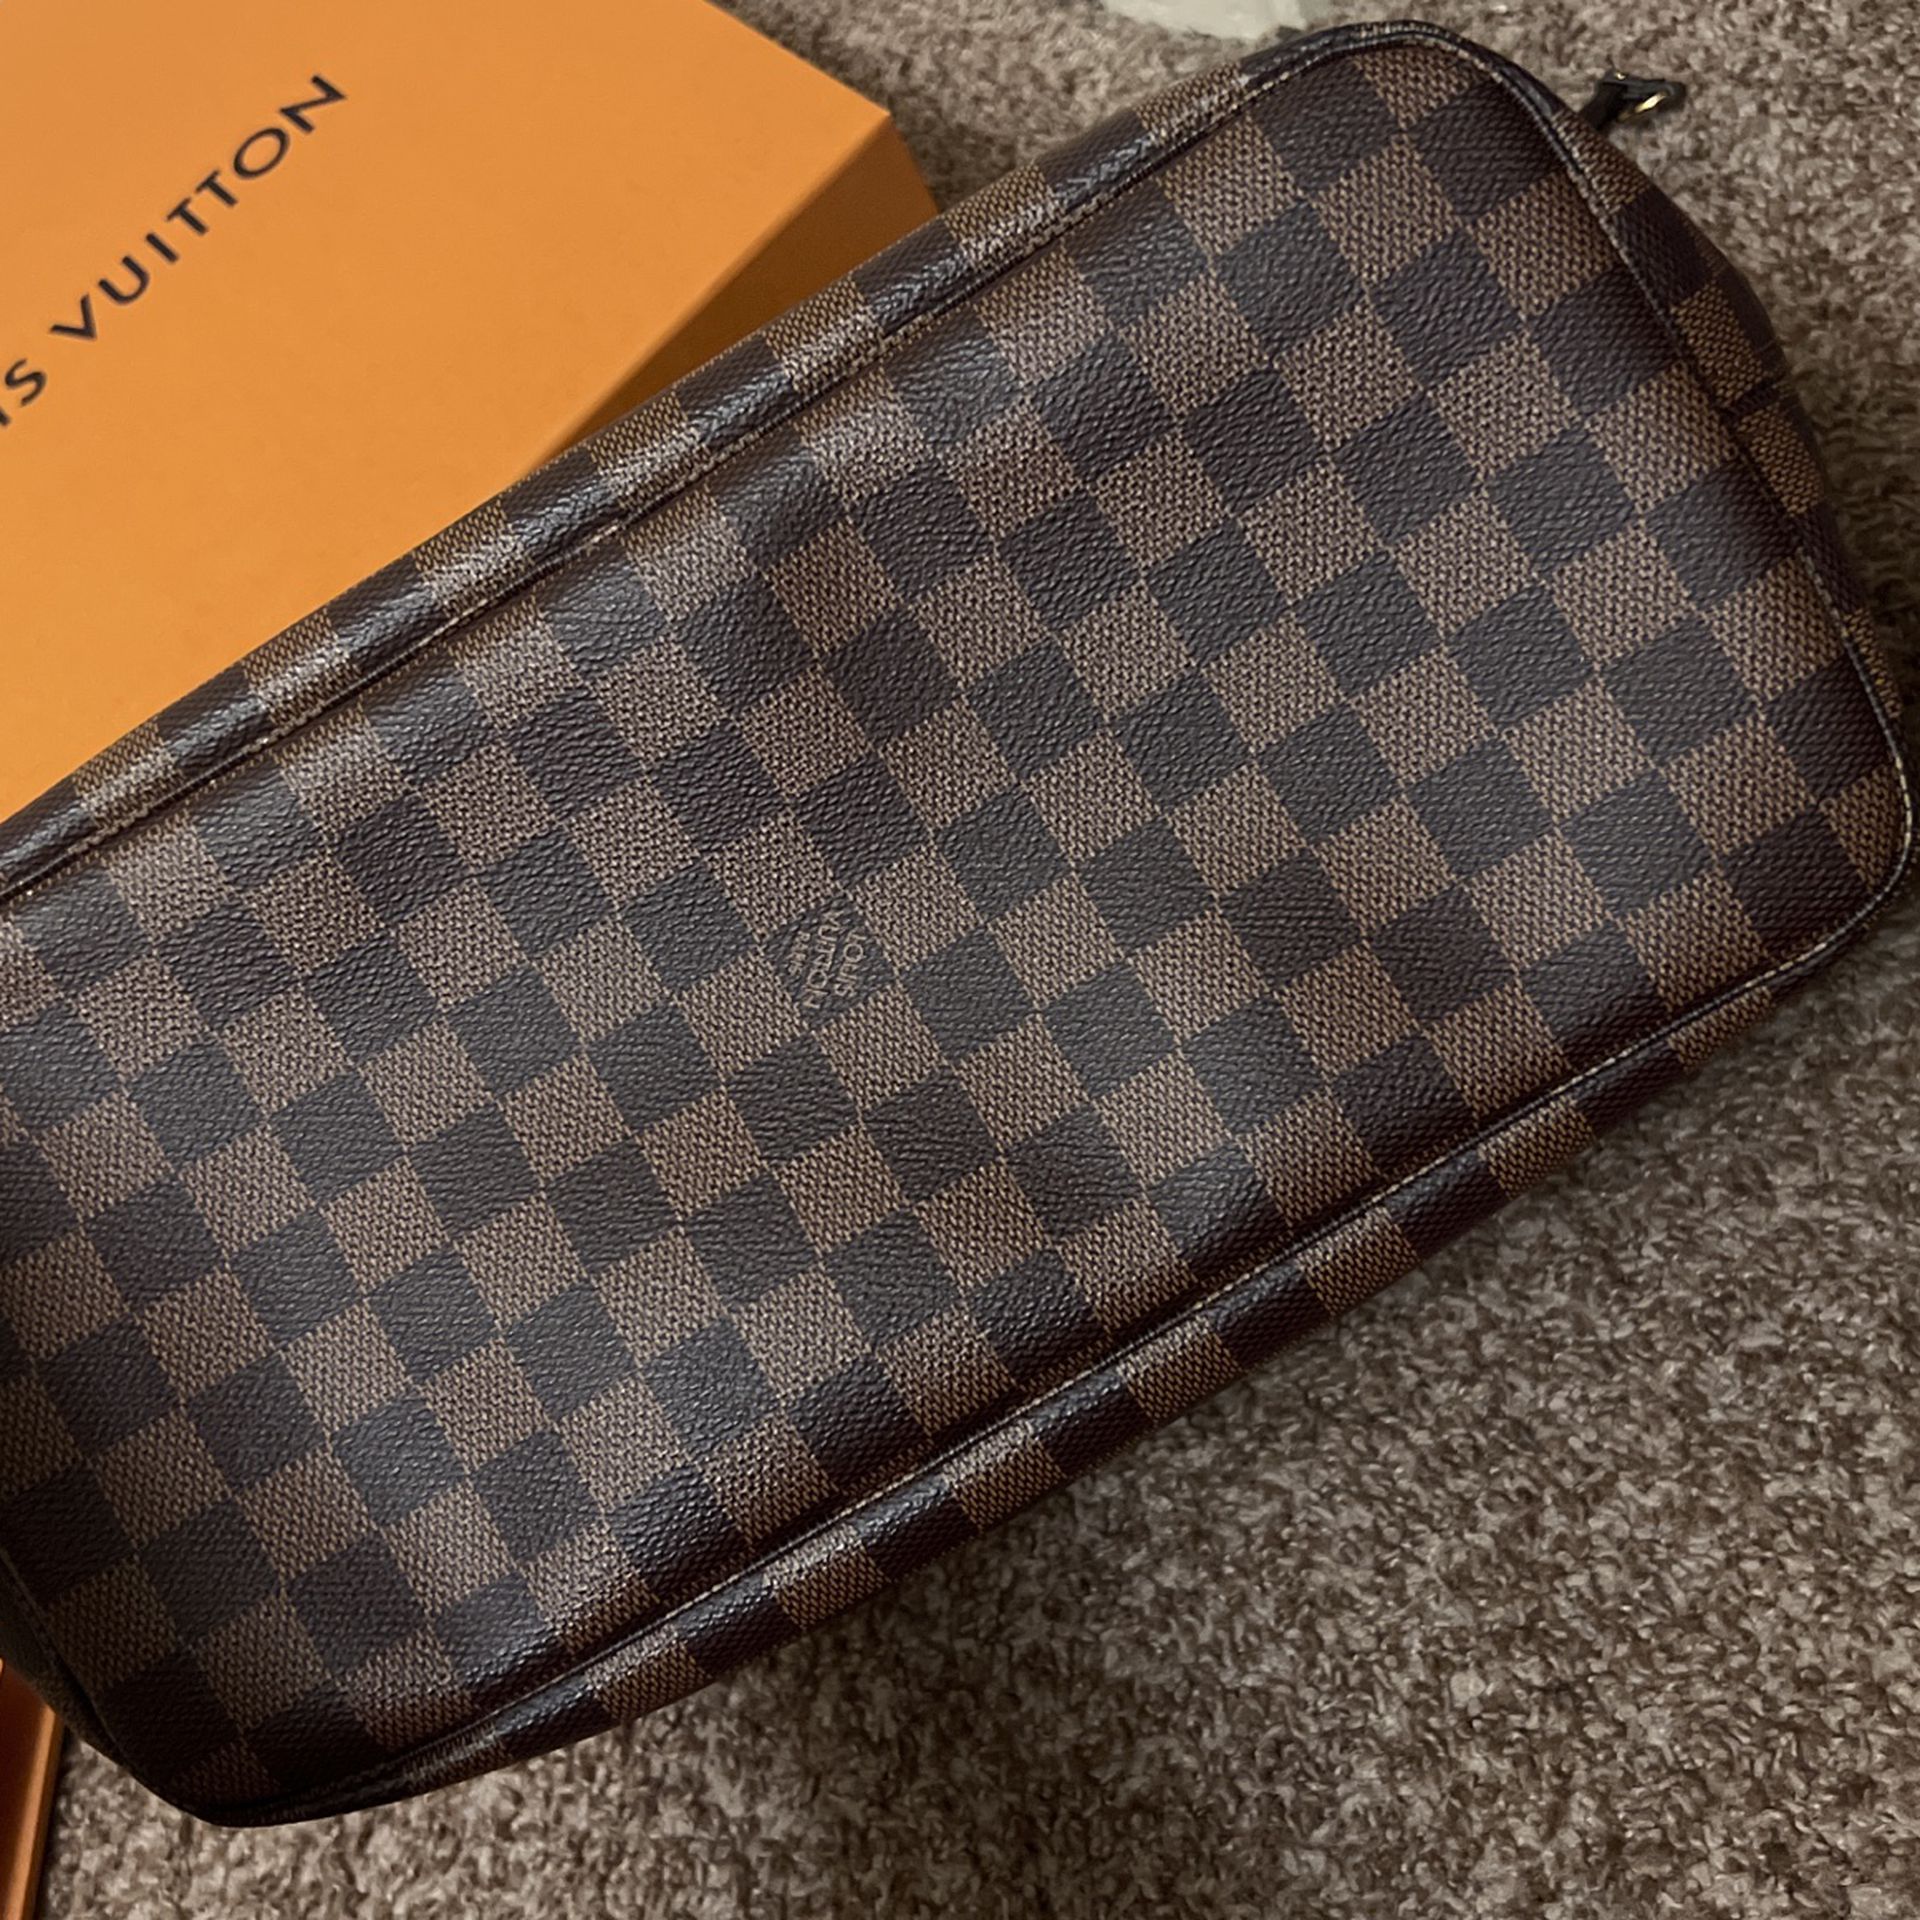 Limited edition - Unavailable - Louis Vuitton Neverfull MM Teddy